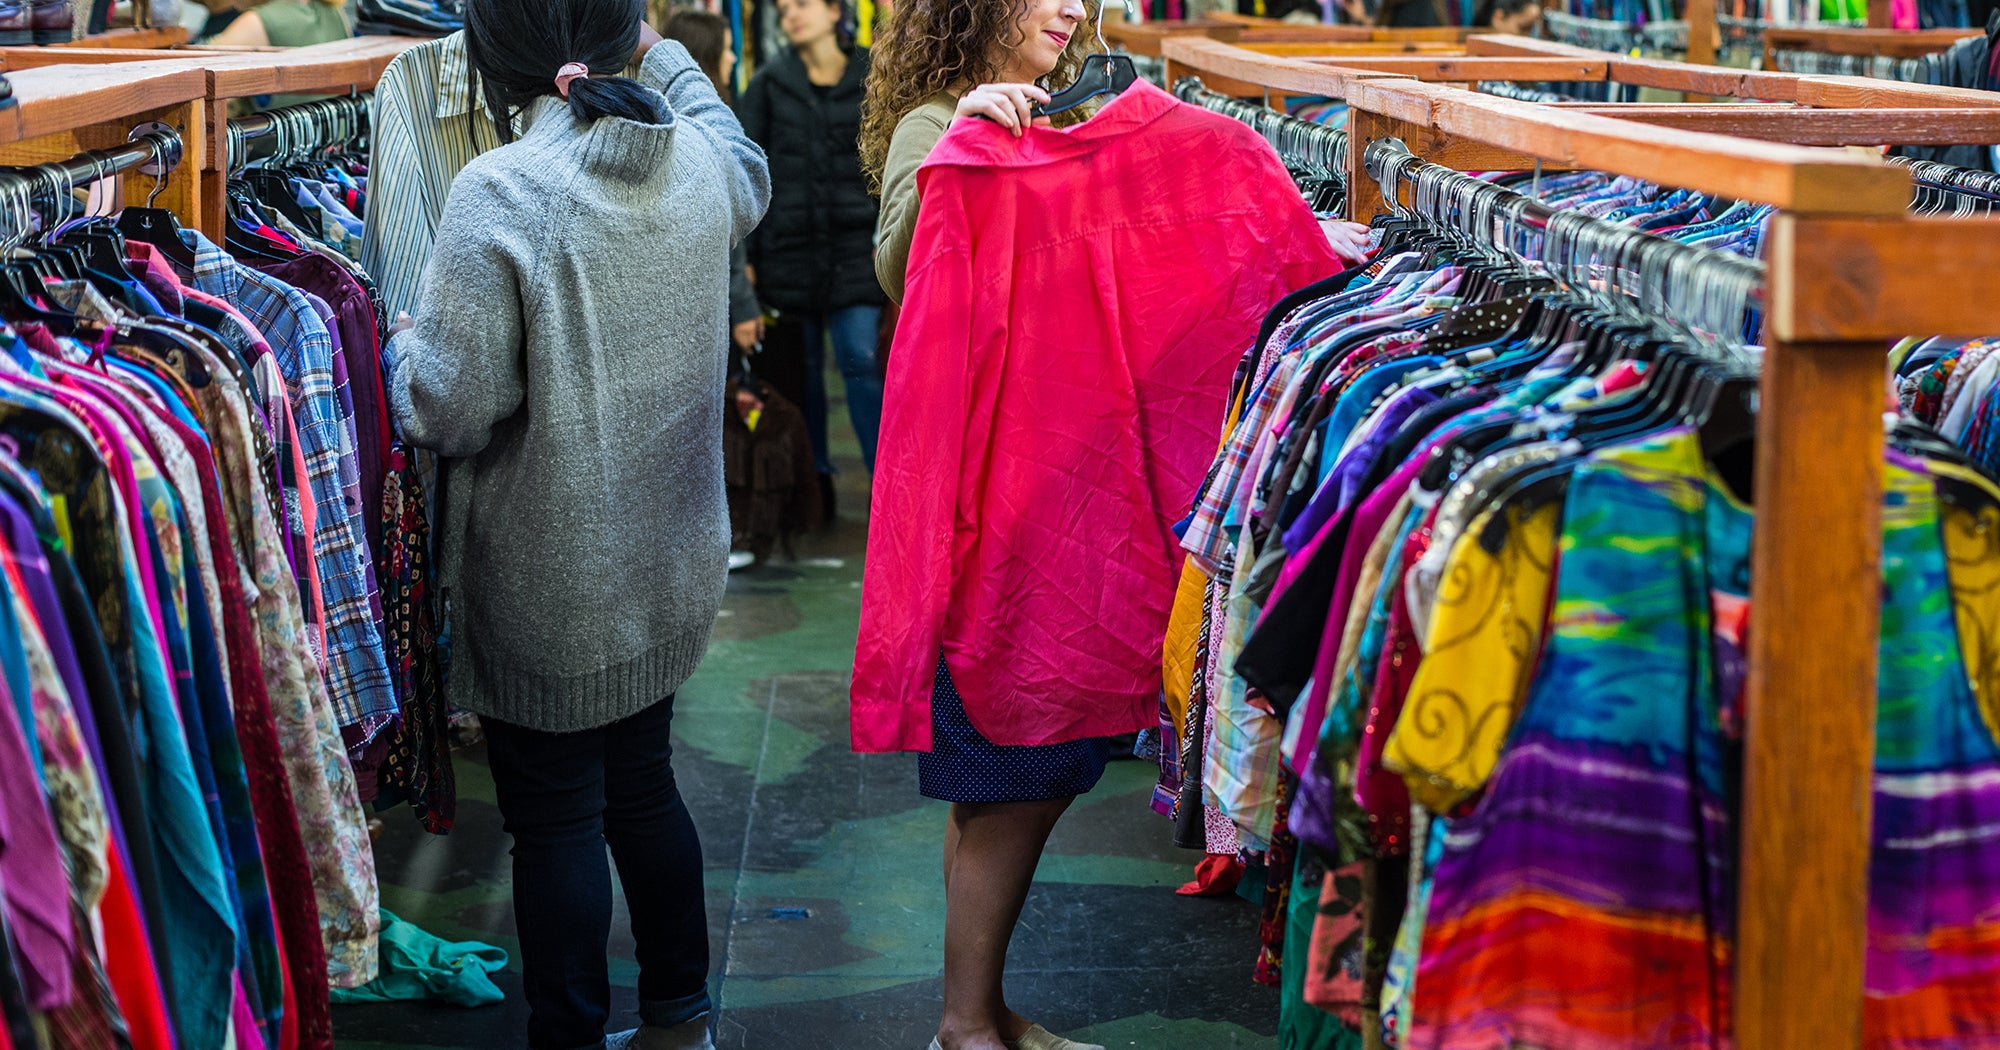 Here's how the United States is falling in love with secondhand clothes